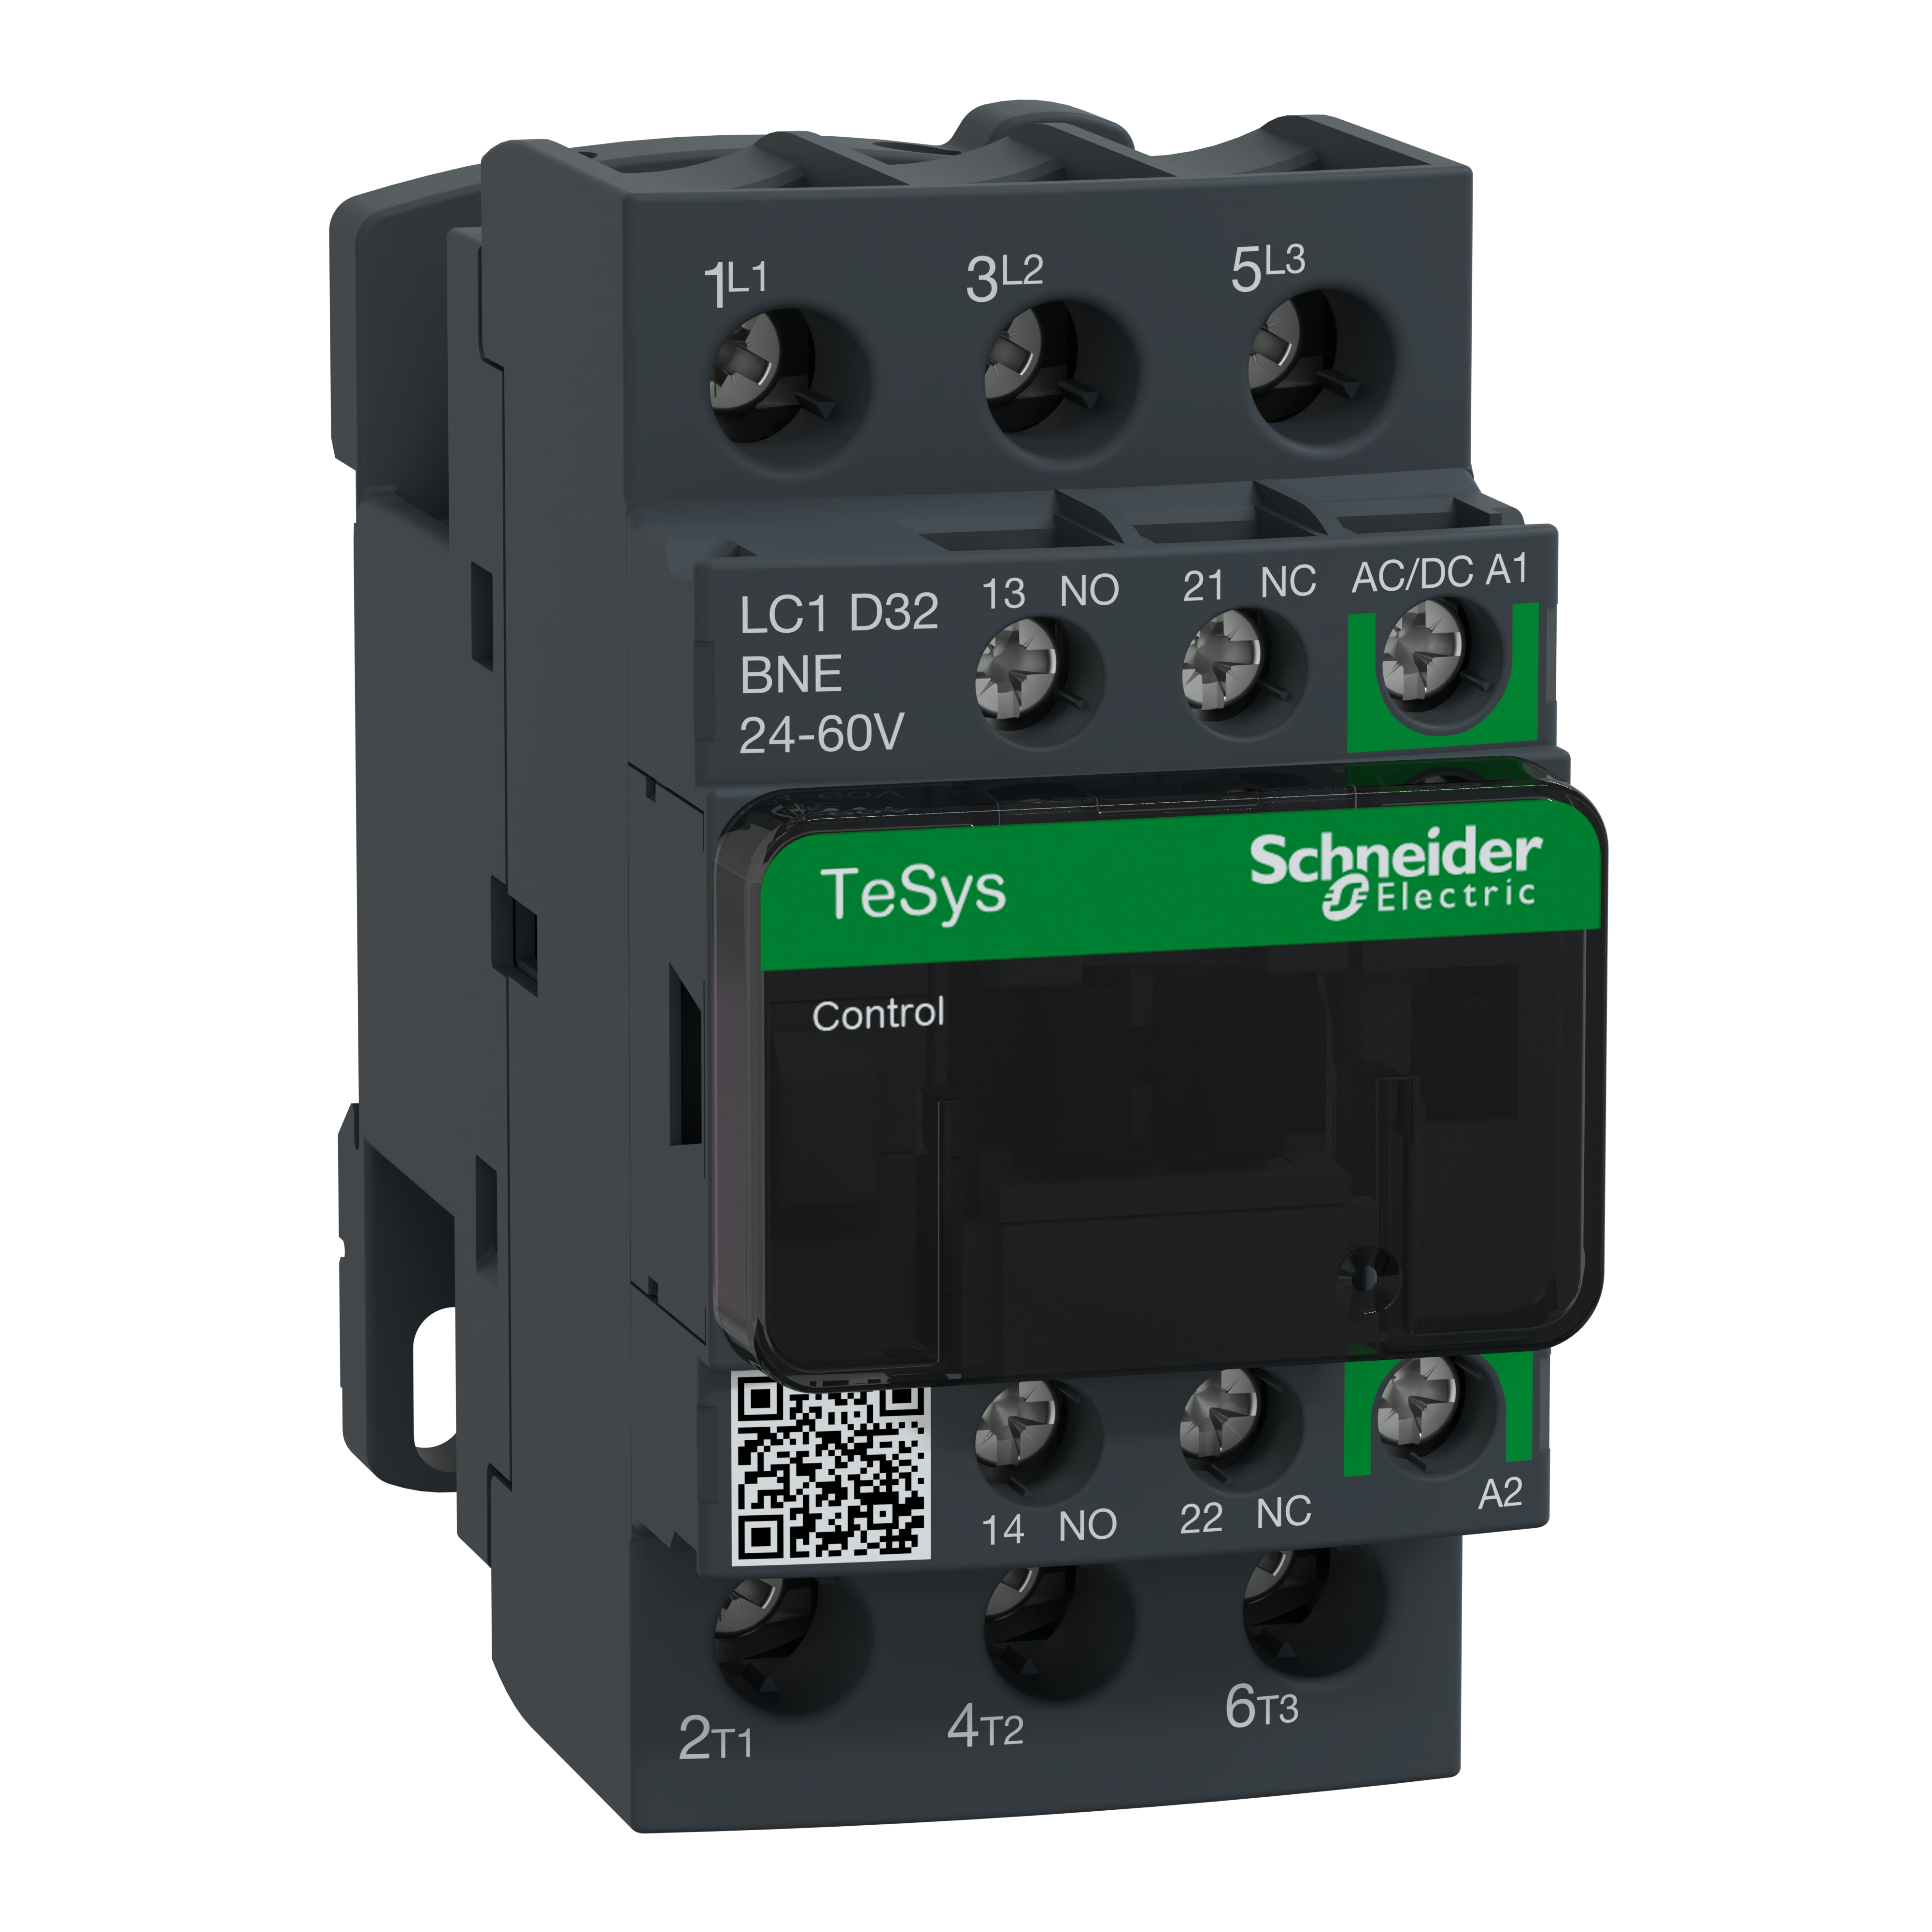 IEC contactor, TeSys Deca Green, nonreversing, 32A, 20HP at 480VAC, up to 100kA SCCR, 3 phase, 3 NO, 24/60VAC/VDC coil, open